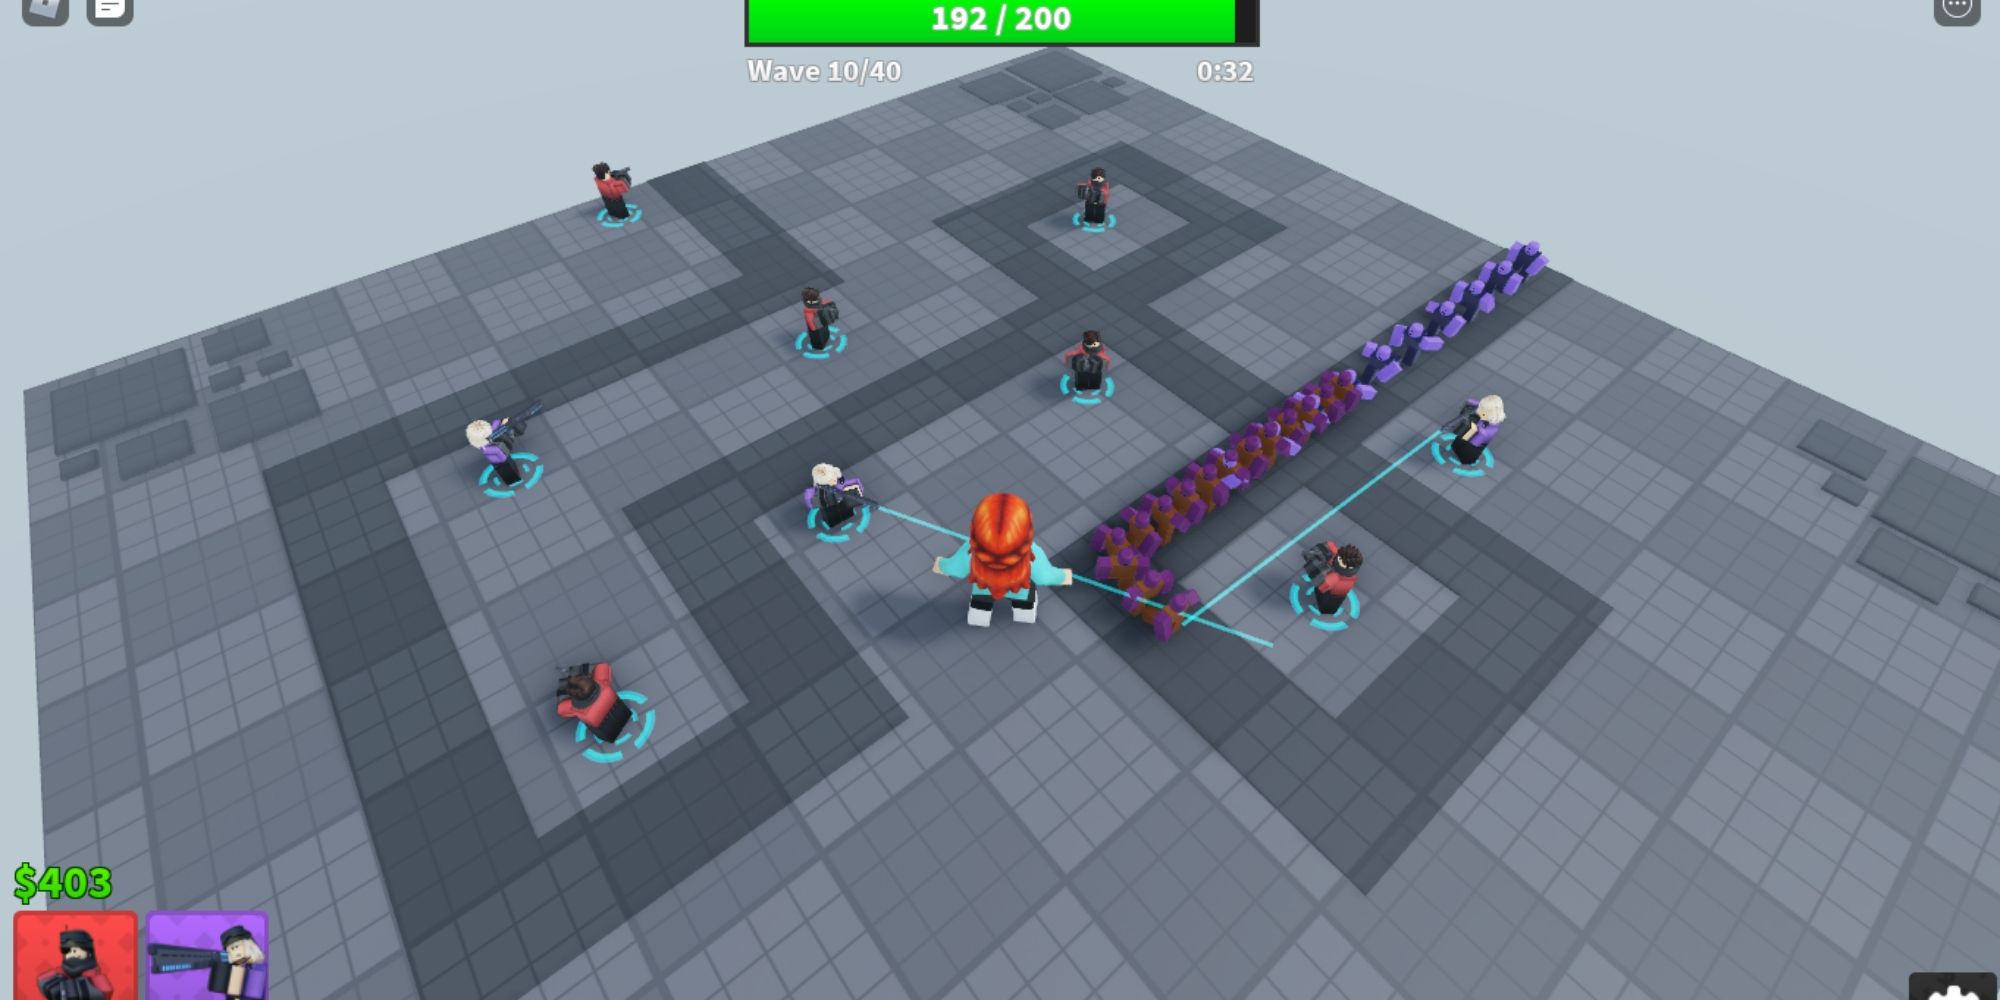 A checkerboard floor with a long, twisting line going through it as enemies travel in from one side and fighters attempt to stop them